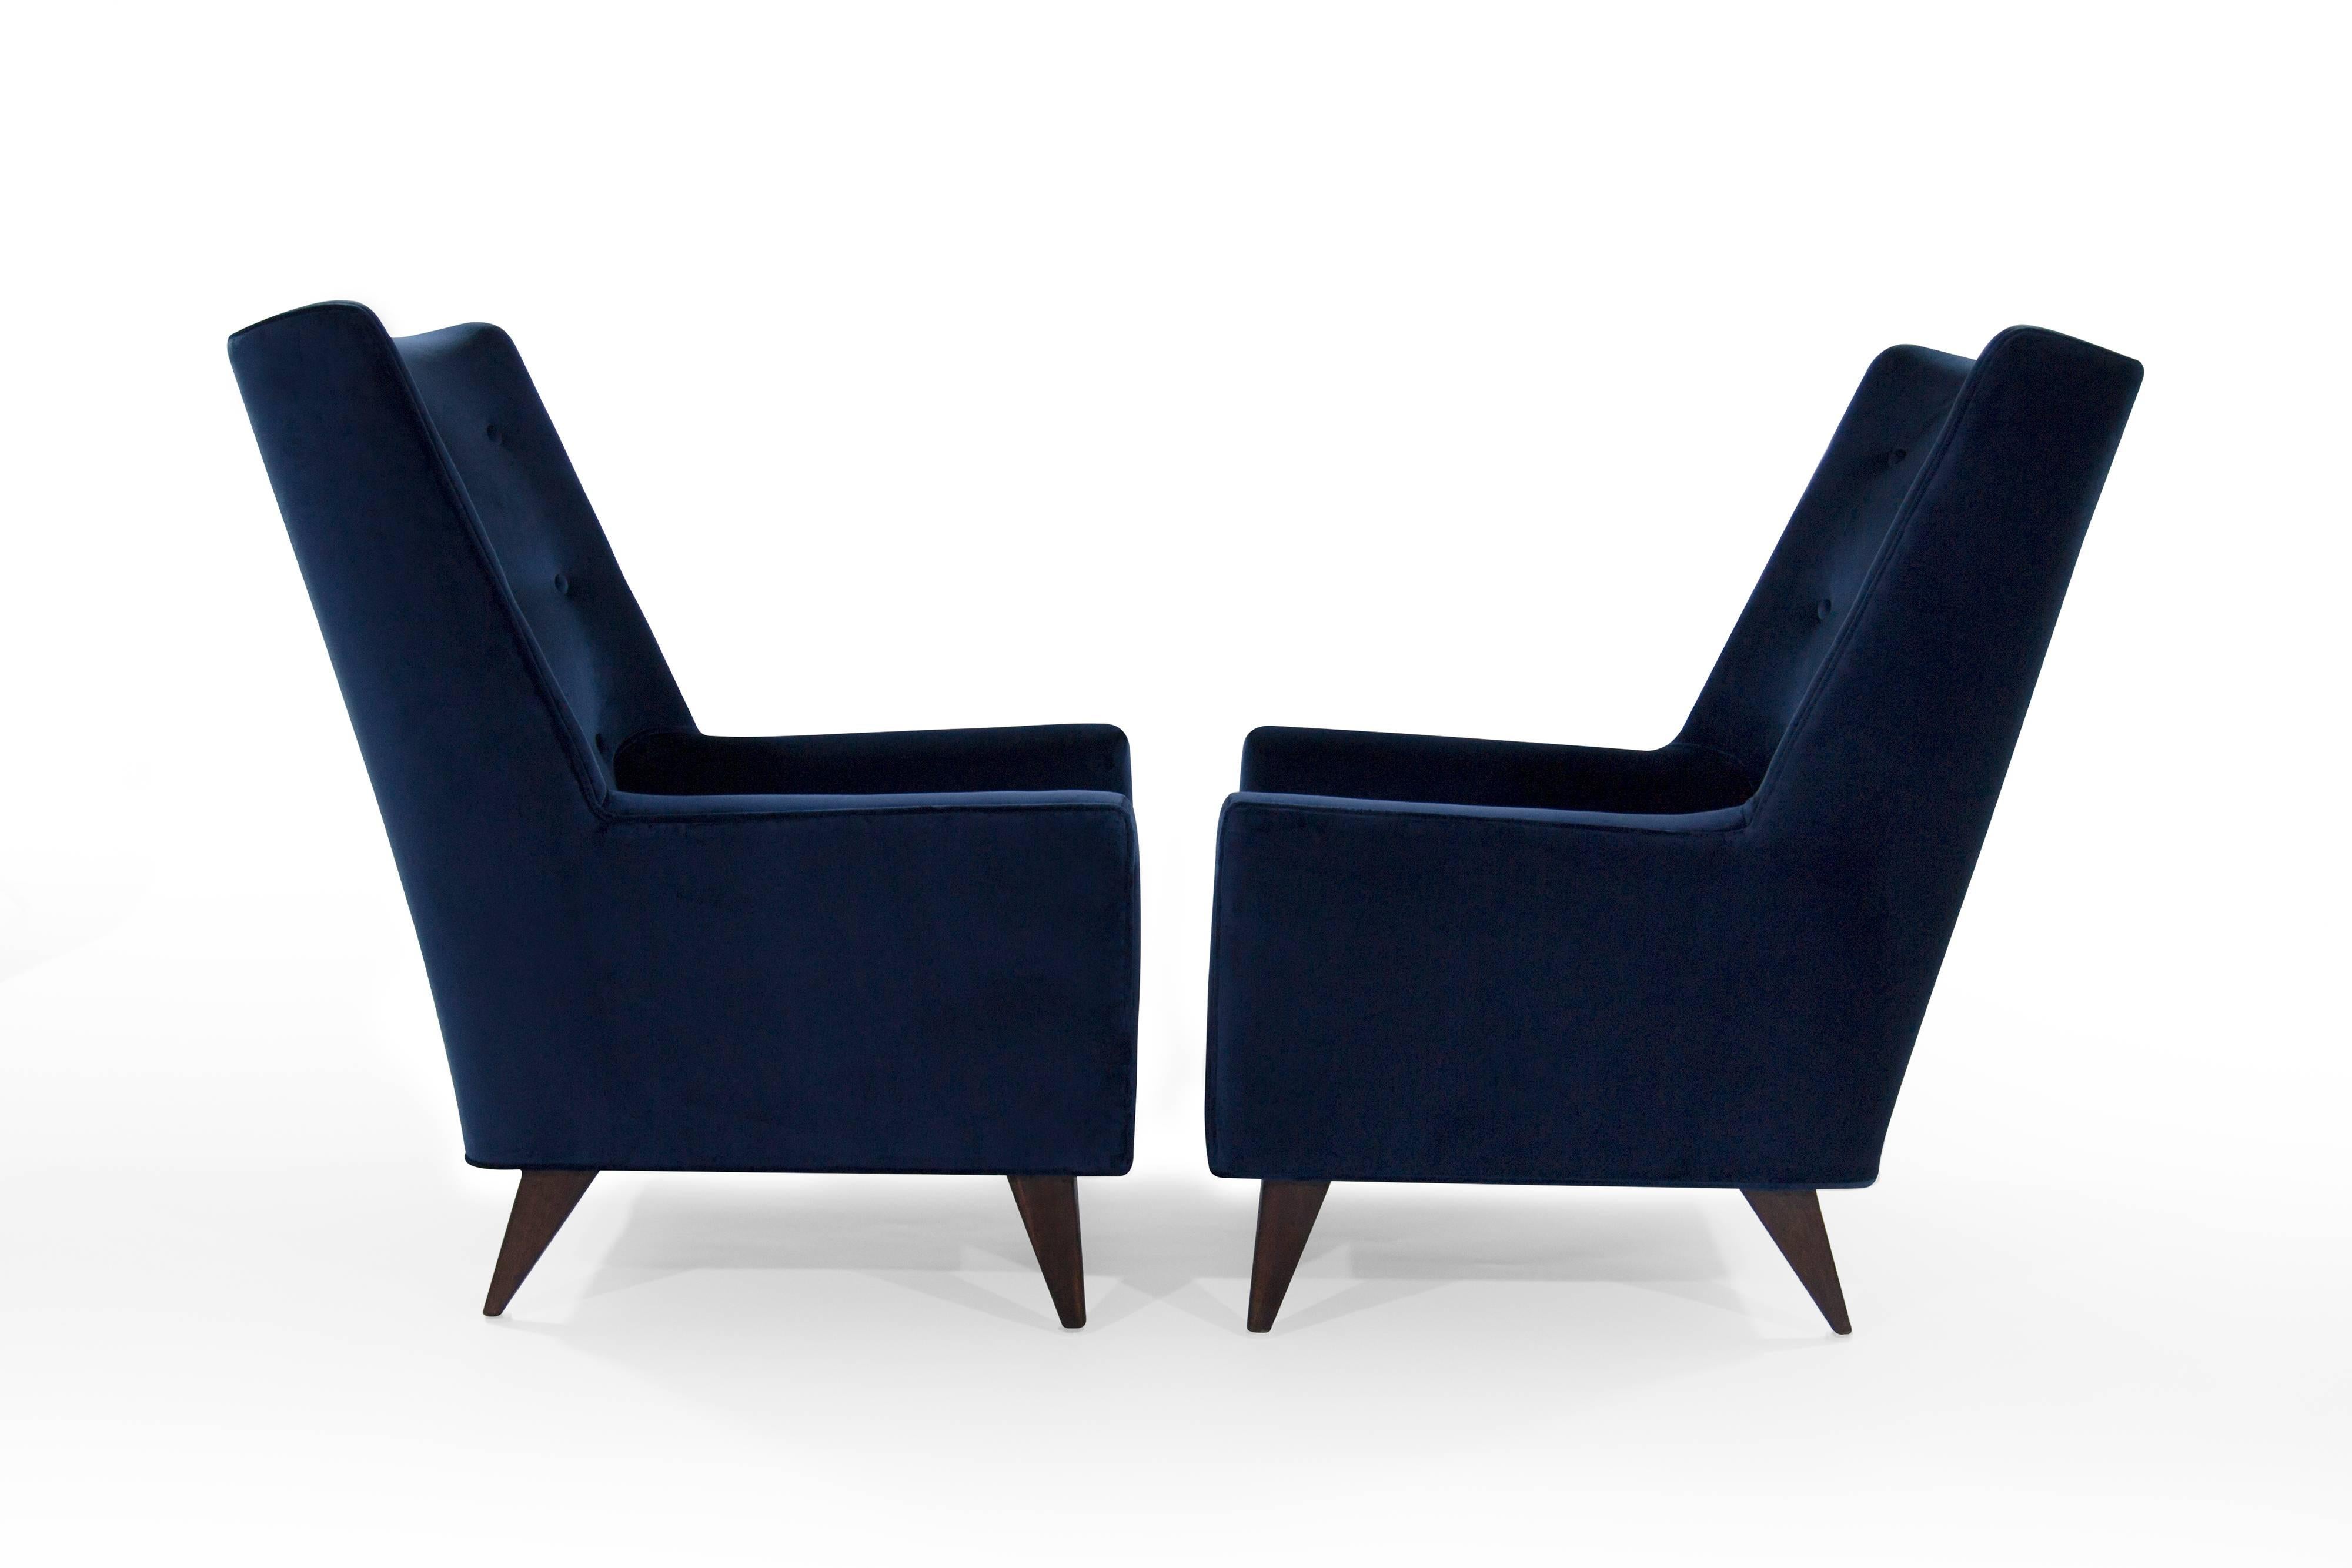 Rare high back lounge chairs designed by Harvey Probber, circa 1950s. 

Newly upholstered in navy blue velvet. Walnut legs fully restored.

Available and priced individually.